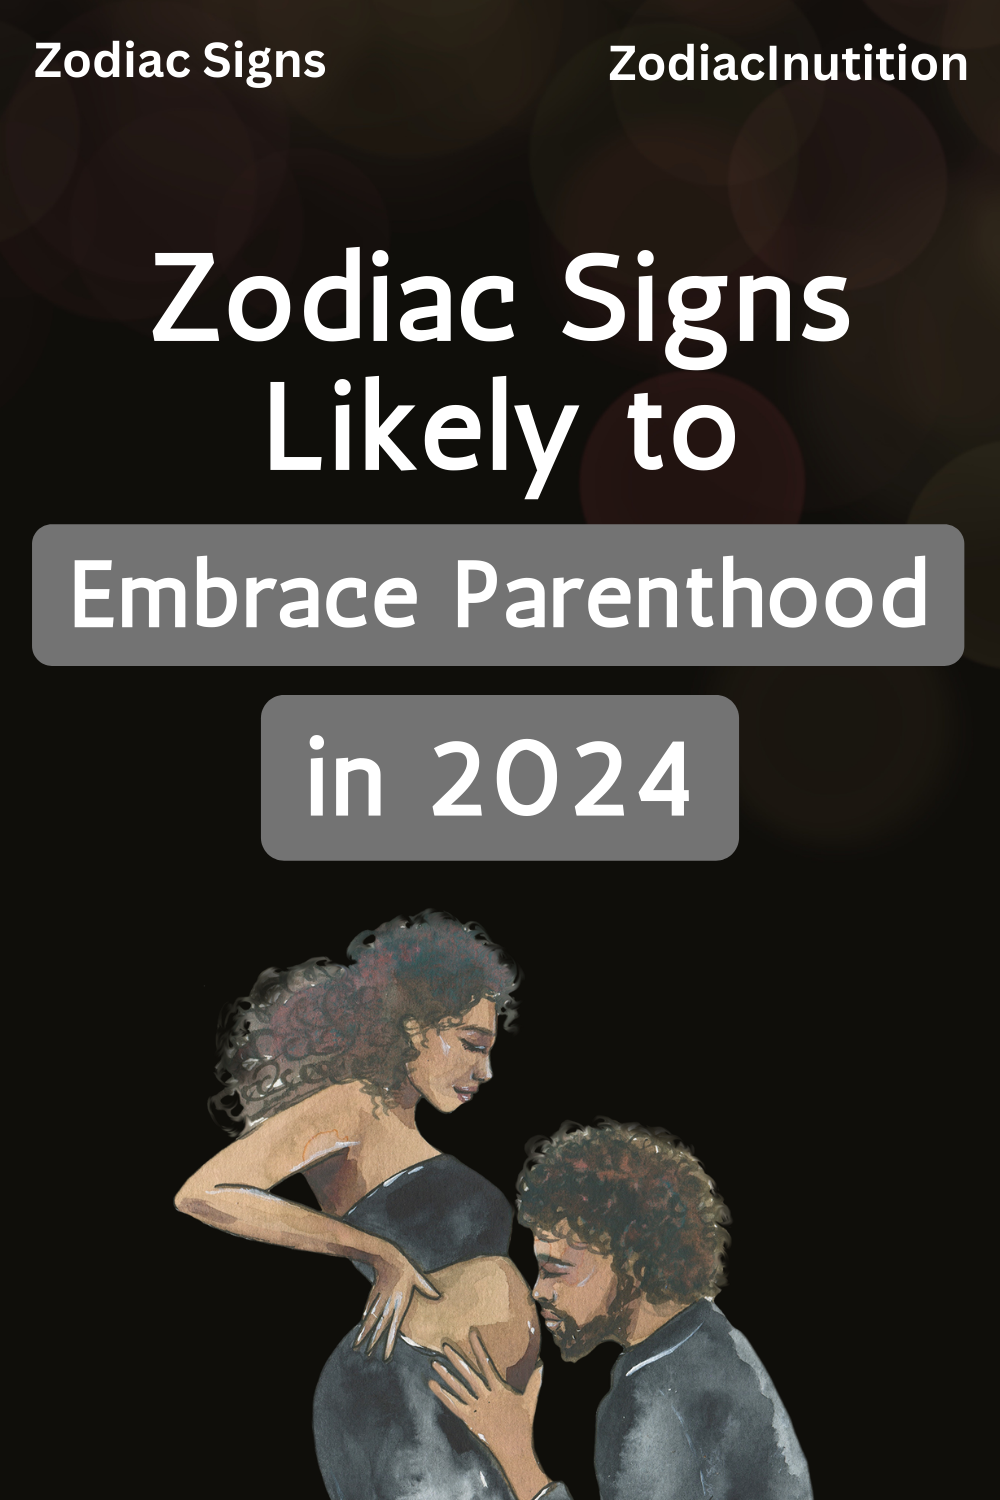 Zodiac Signs Likely to Embrace Parenthood in 2024